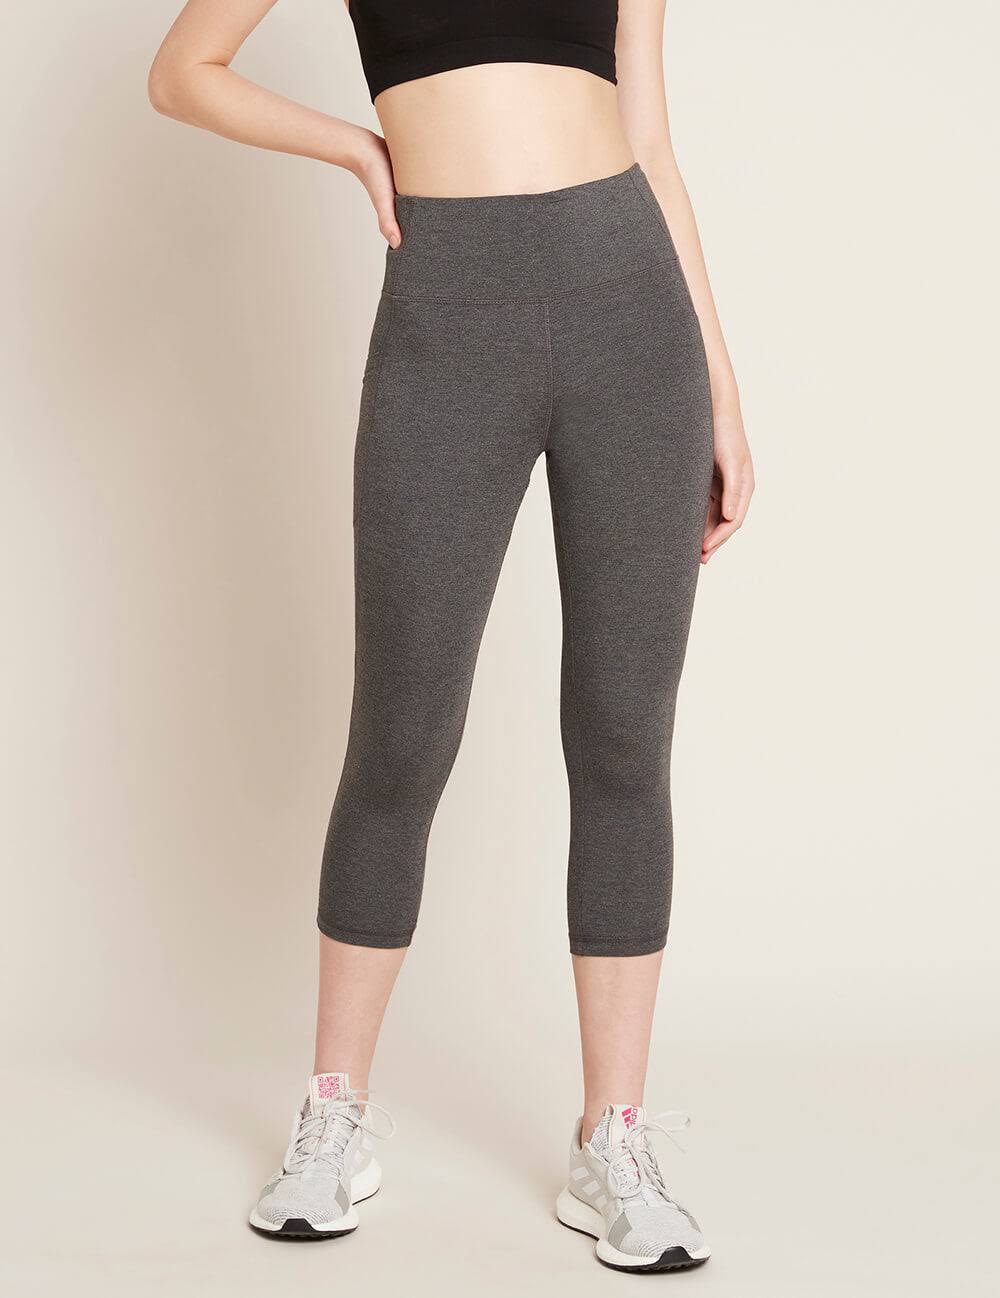 Active Blended High-Waisted 3/4 Leggings with Pockets, Dark Grey Marl / S